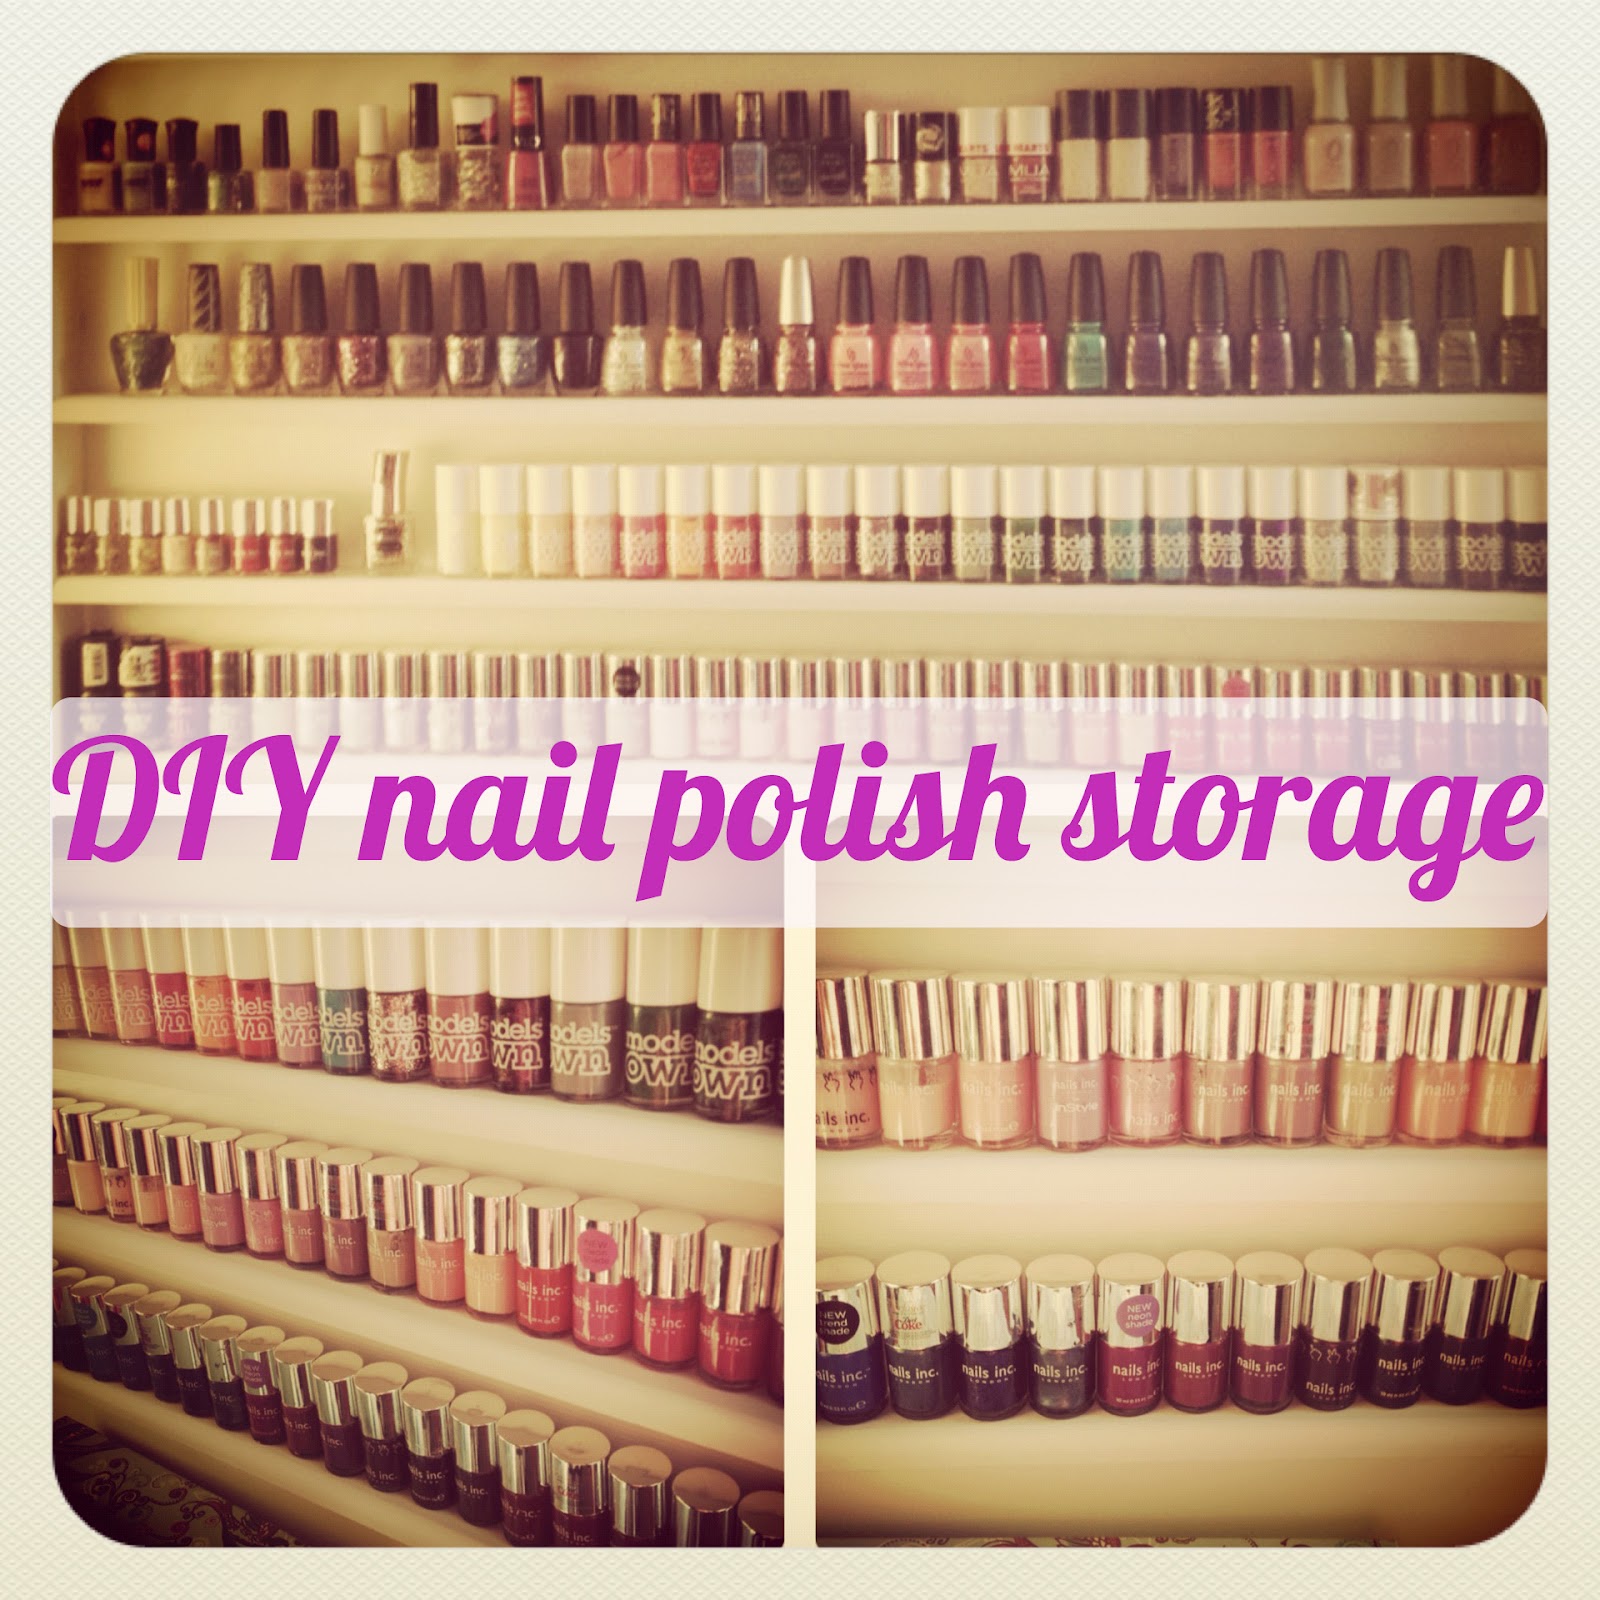 This post has been a long time coming - I've had my nail polish storage up